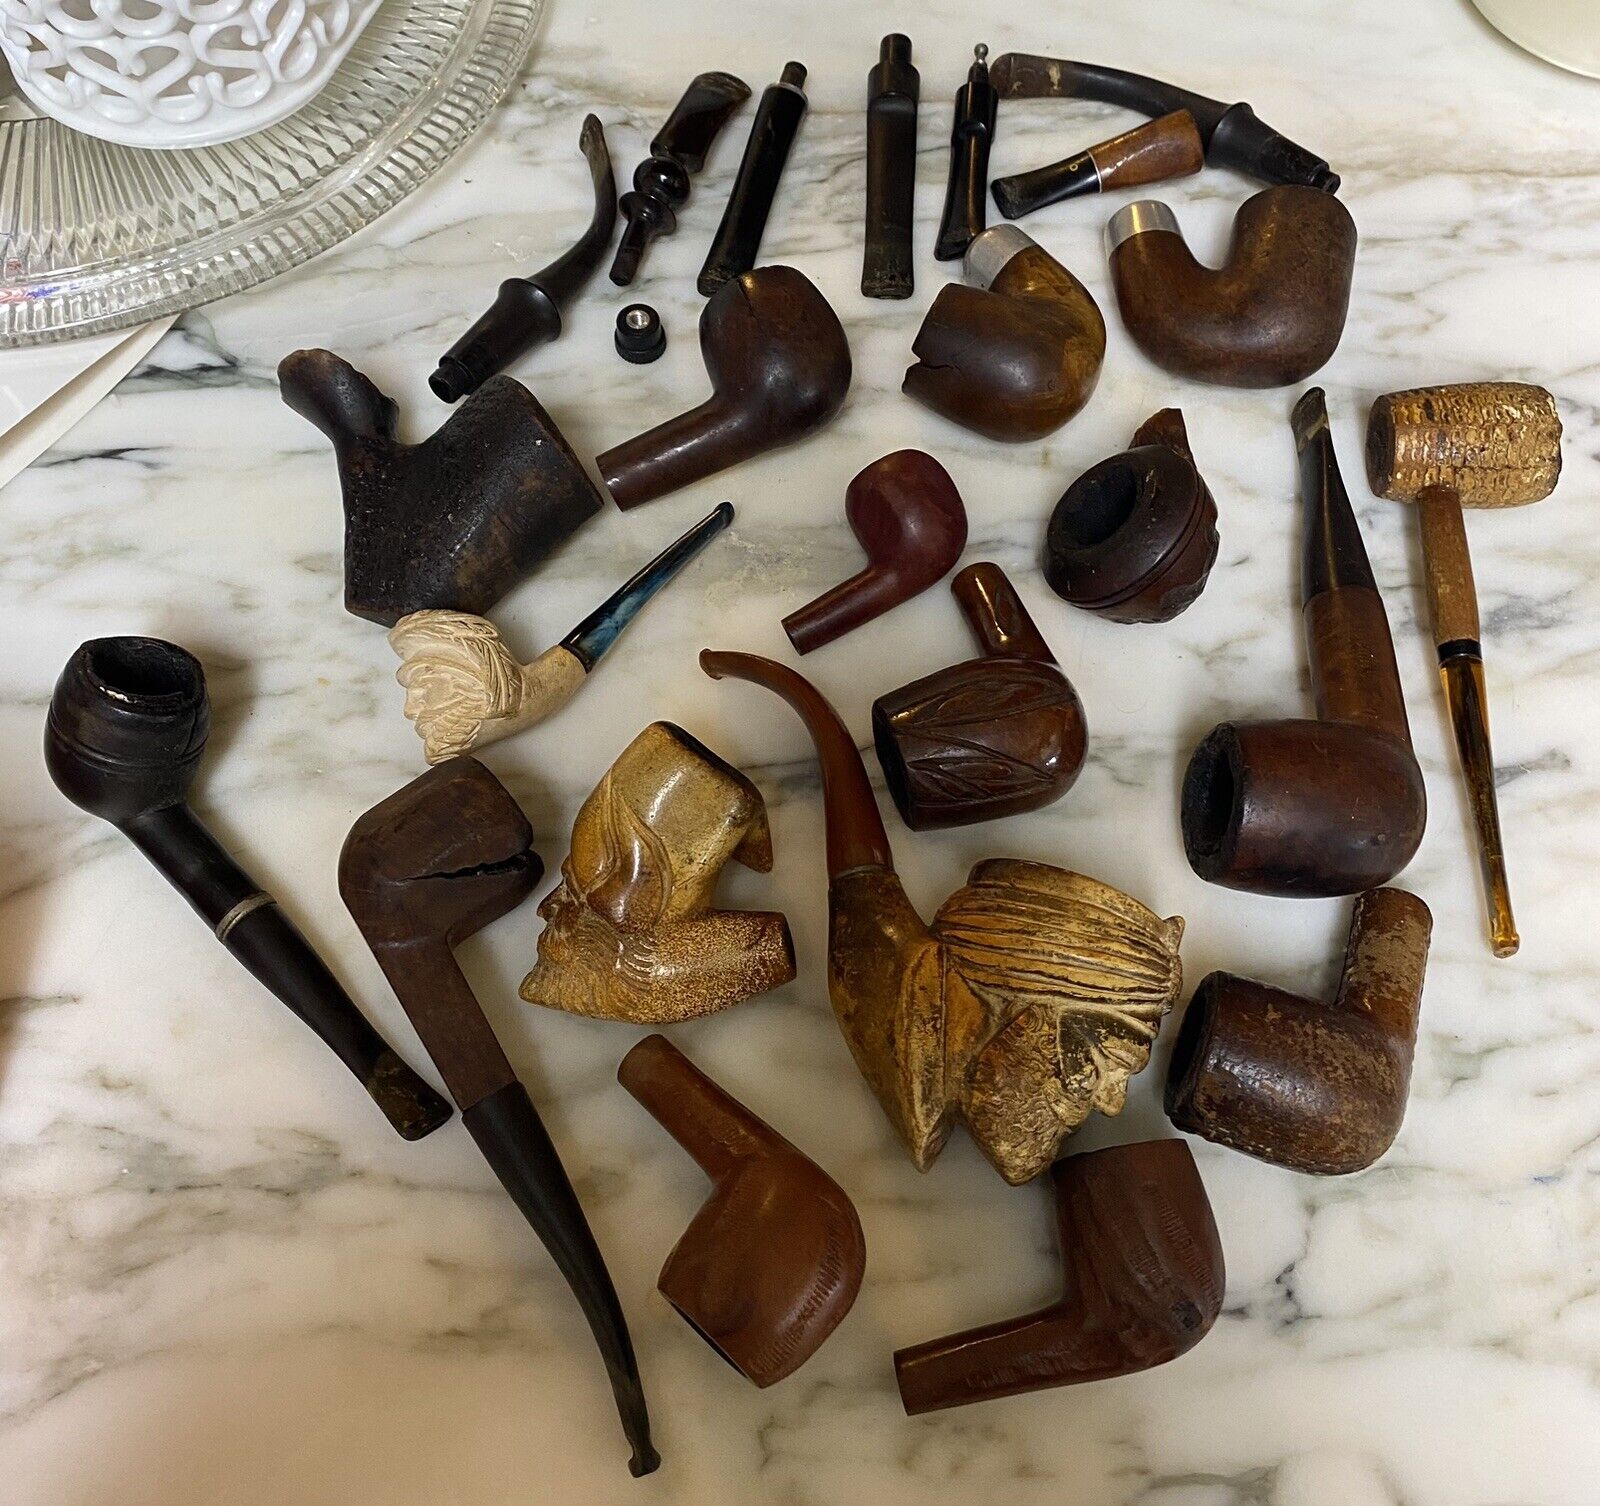 Vintage Old Estate Pipes Tobacco Smoking AS FOUND FACES MEERSCHAUM  As Is Lot